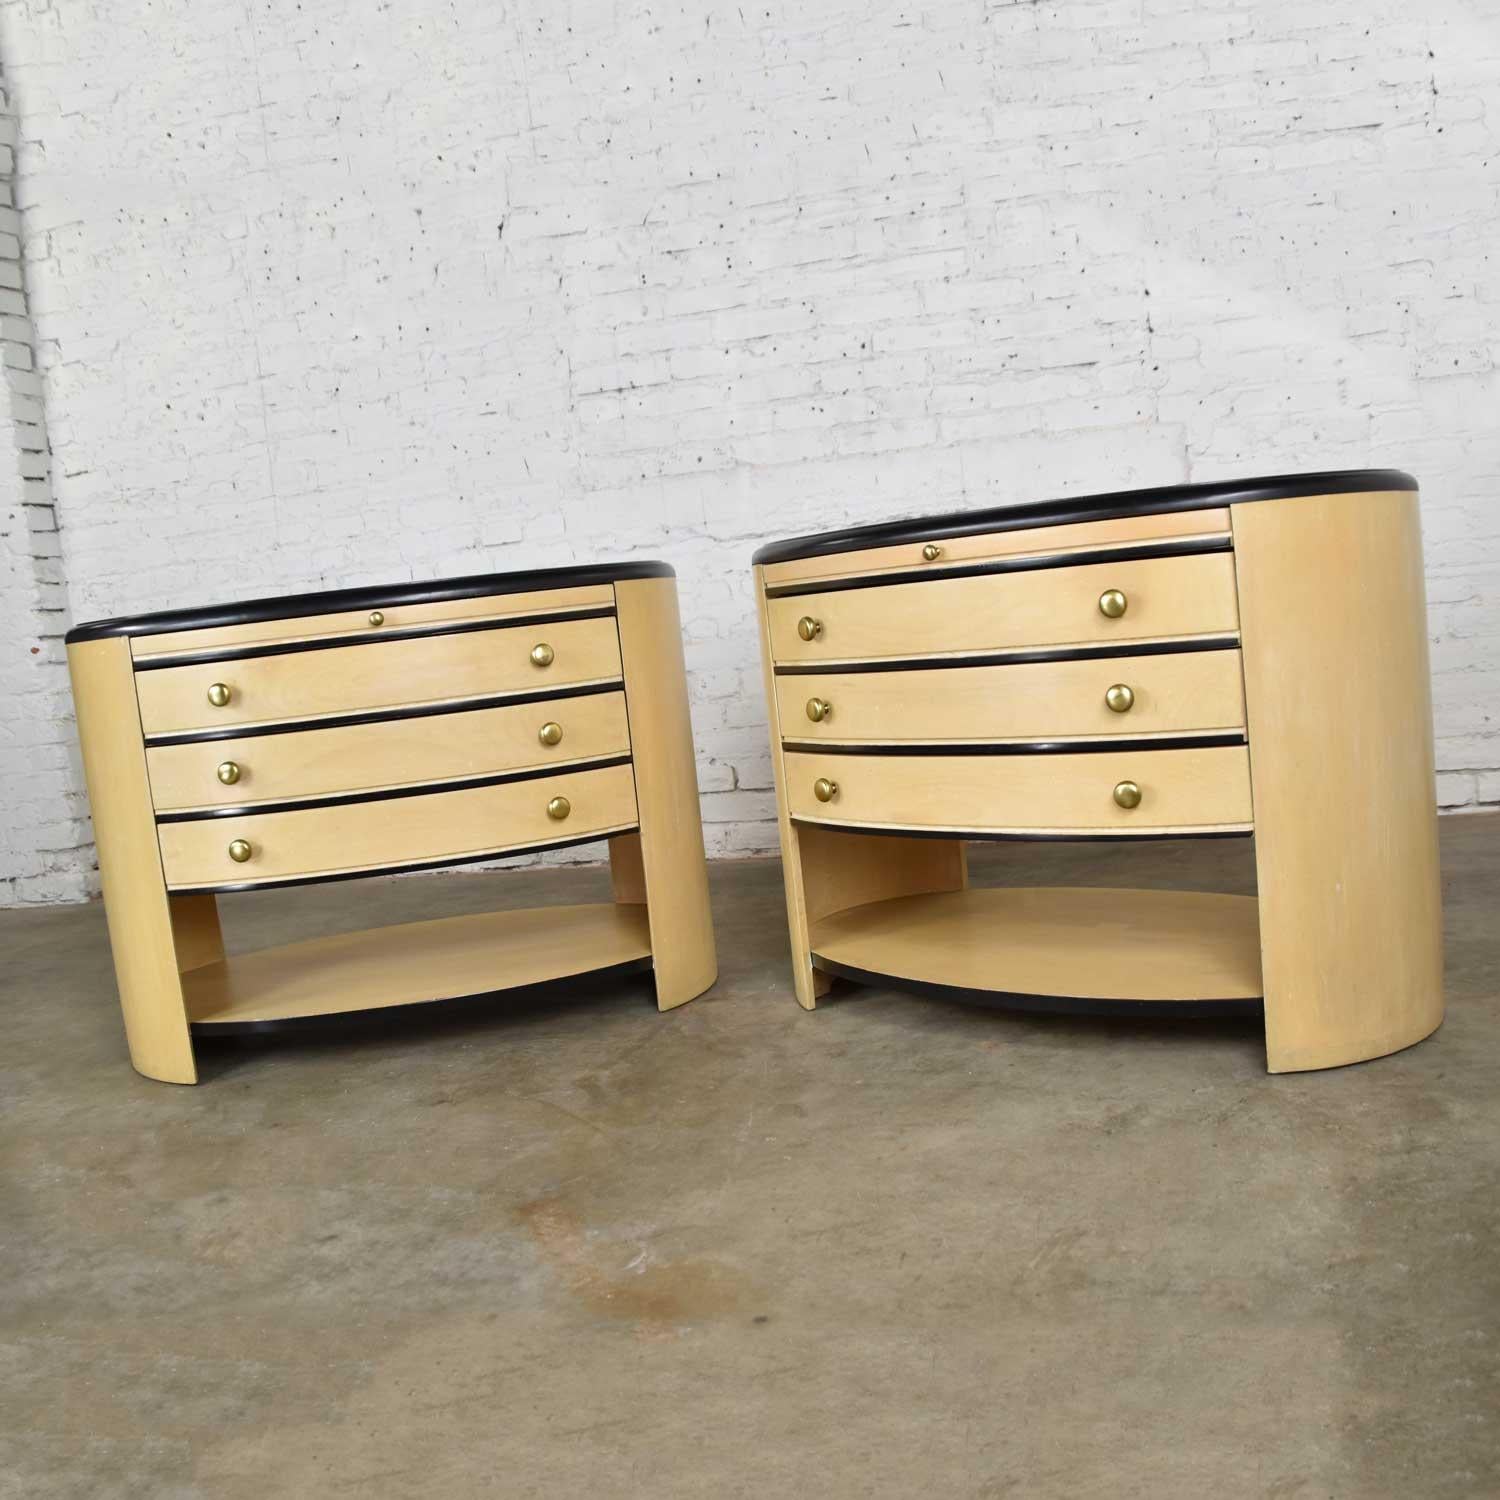 20th Century Vintage Modern Pair of Oval Blonde and Black Nightstands or Bedside Cabinets